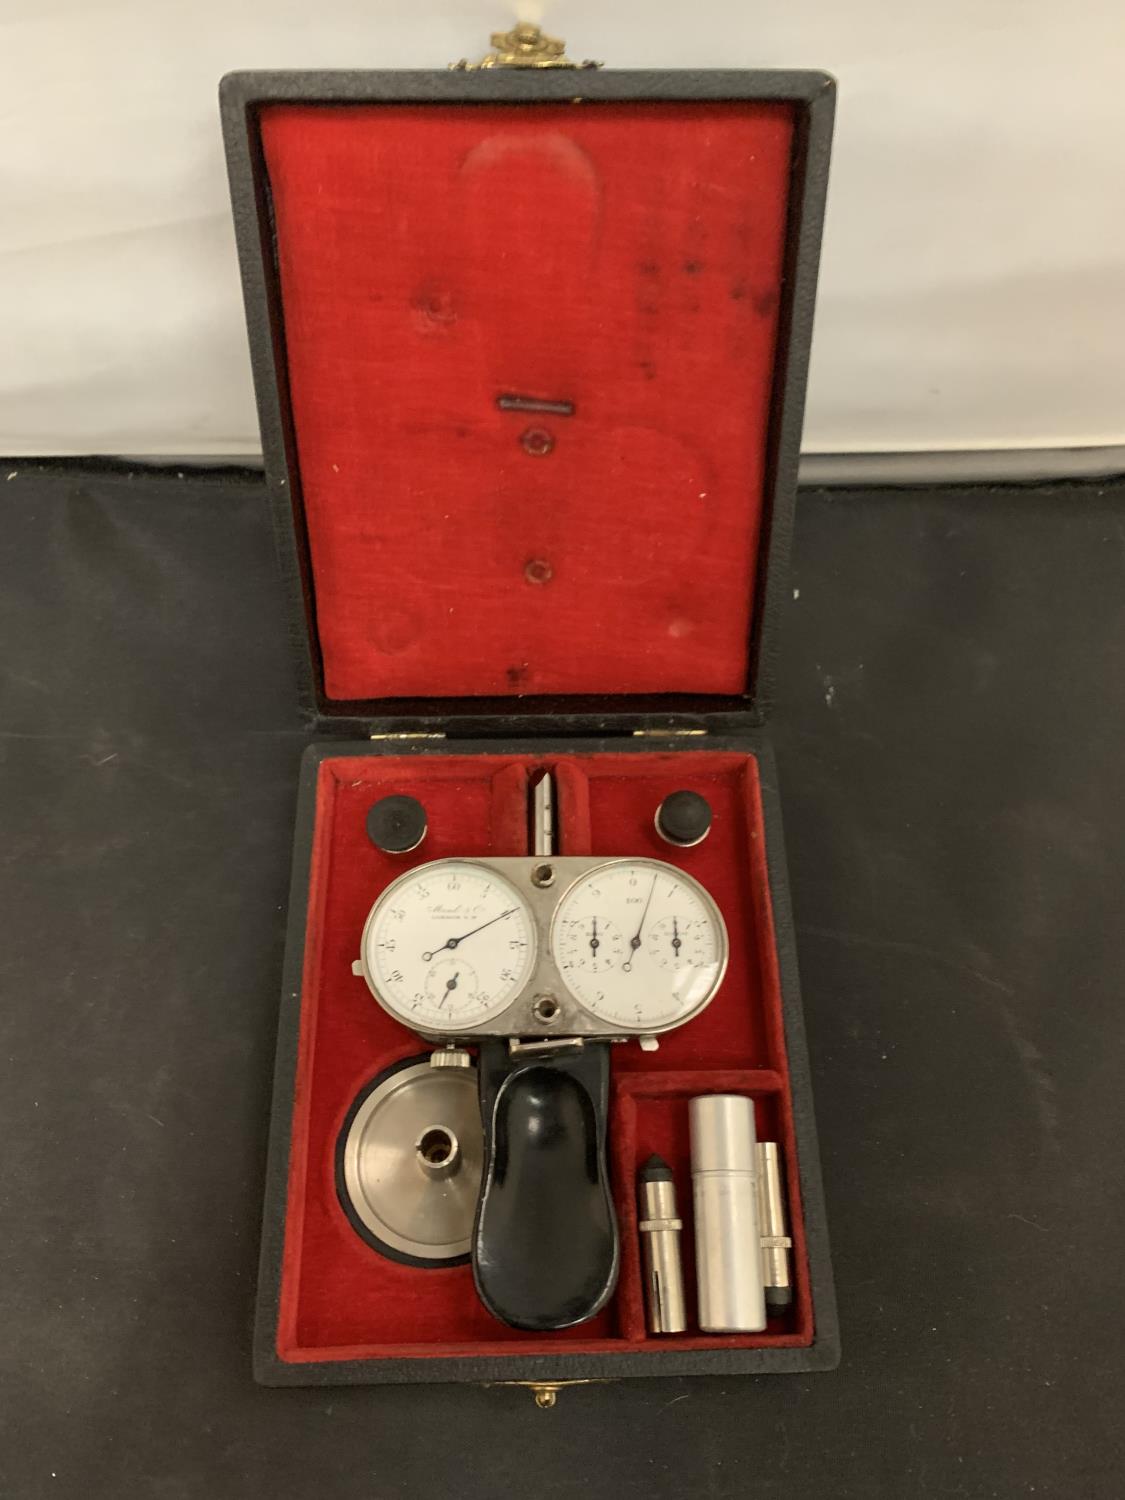 A BOXED VINTAGE 'MOUL & CO' LONDON S.W. IPS METER FOR MEASURING REEL TO REEL TAPE RECORDERS